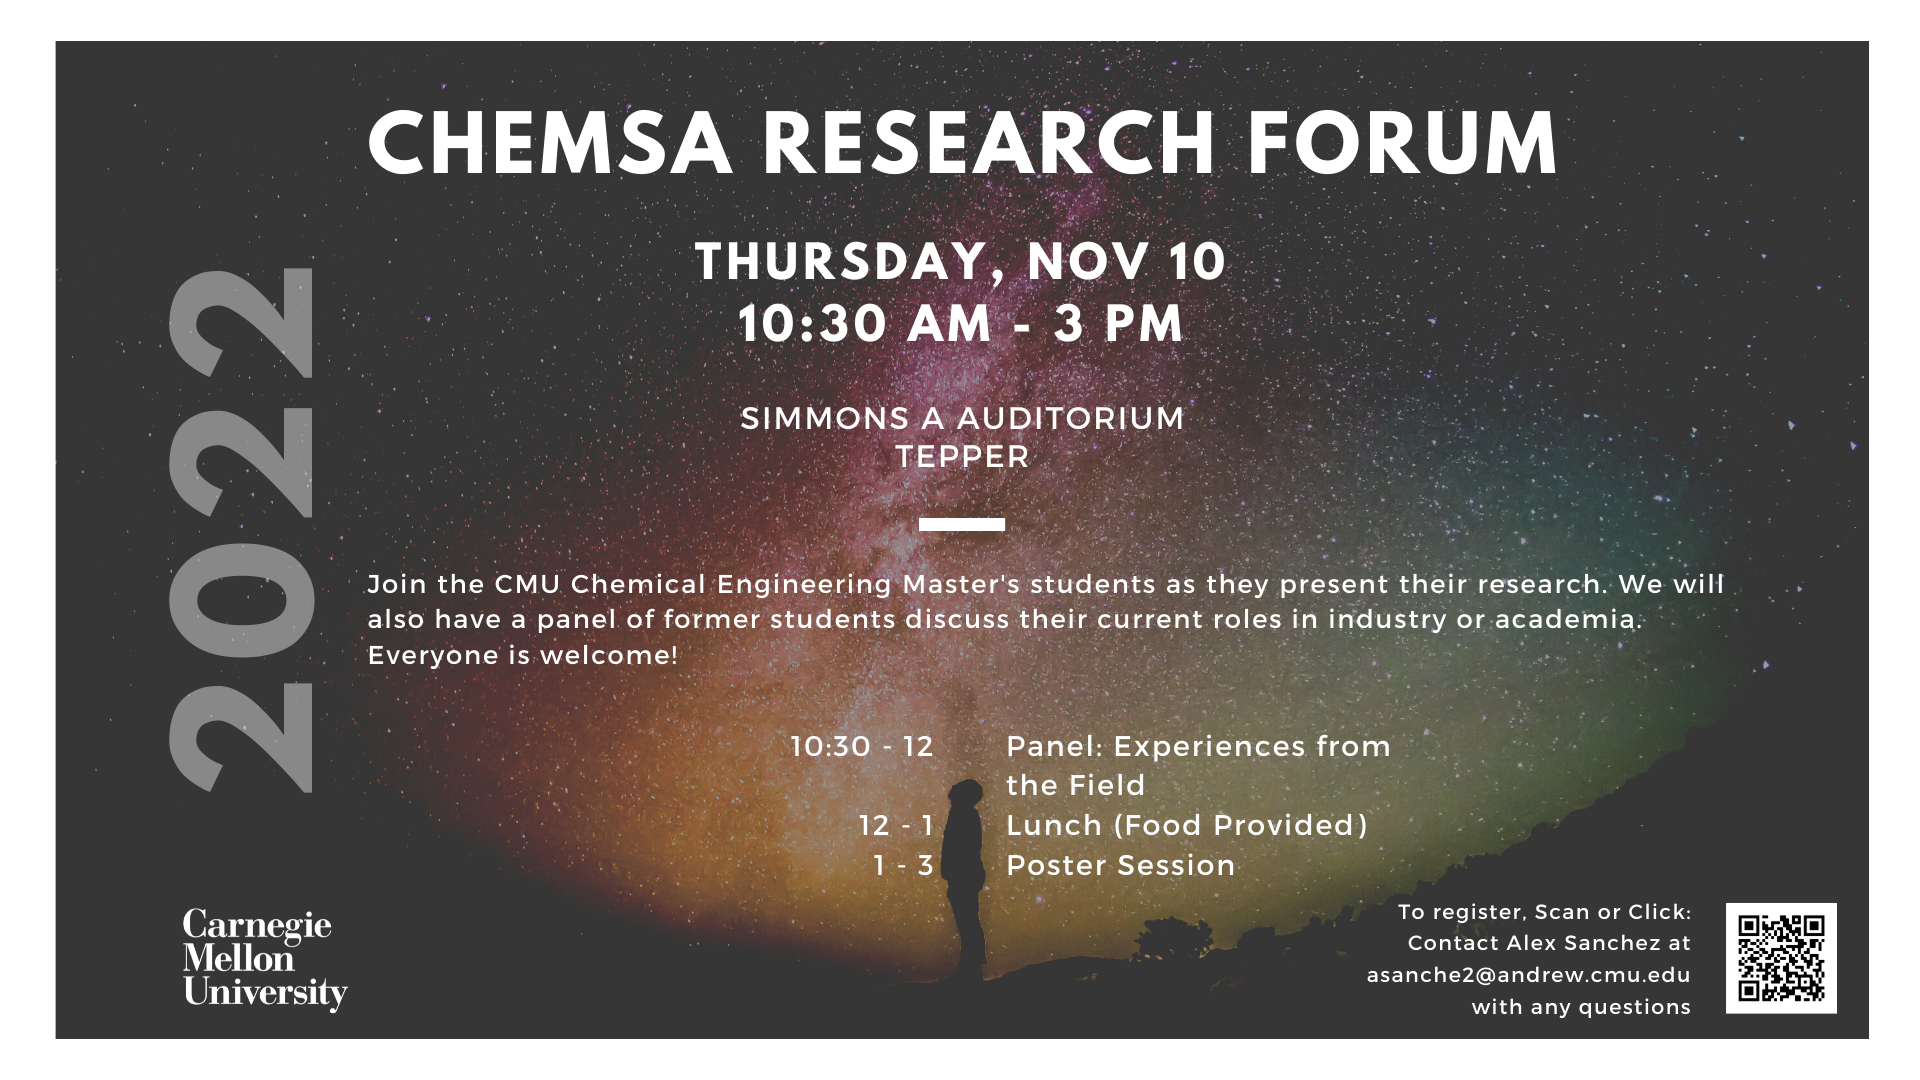 CHEMSA Research Forum poster - details in text below